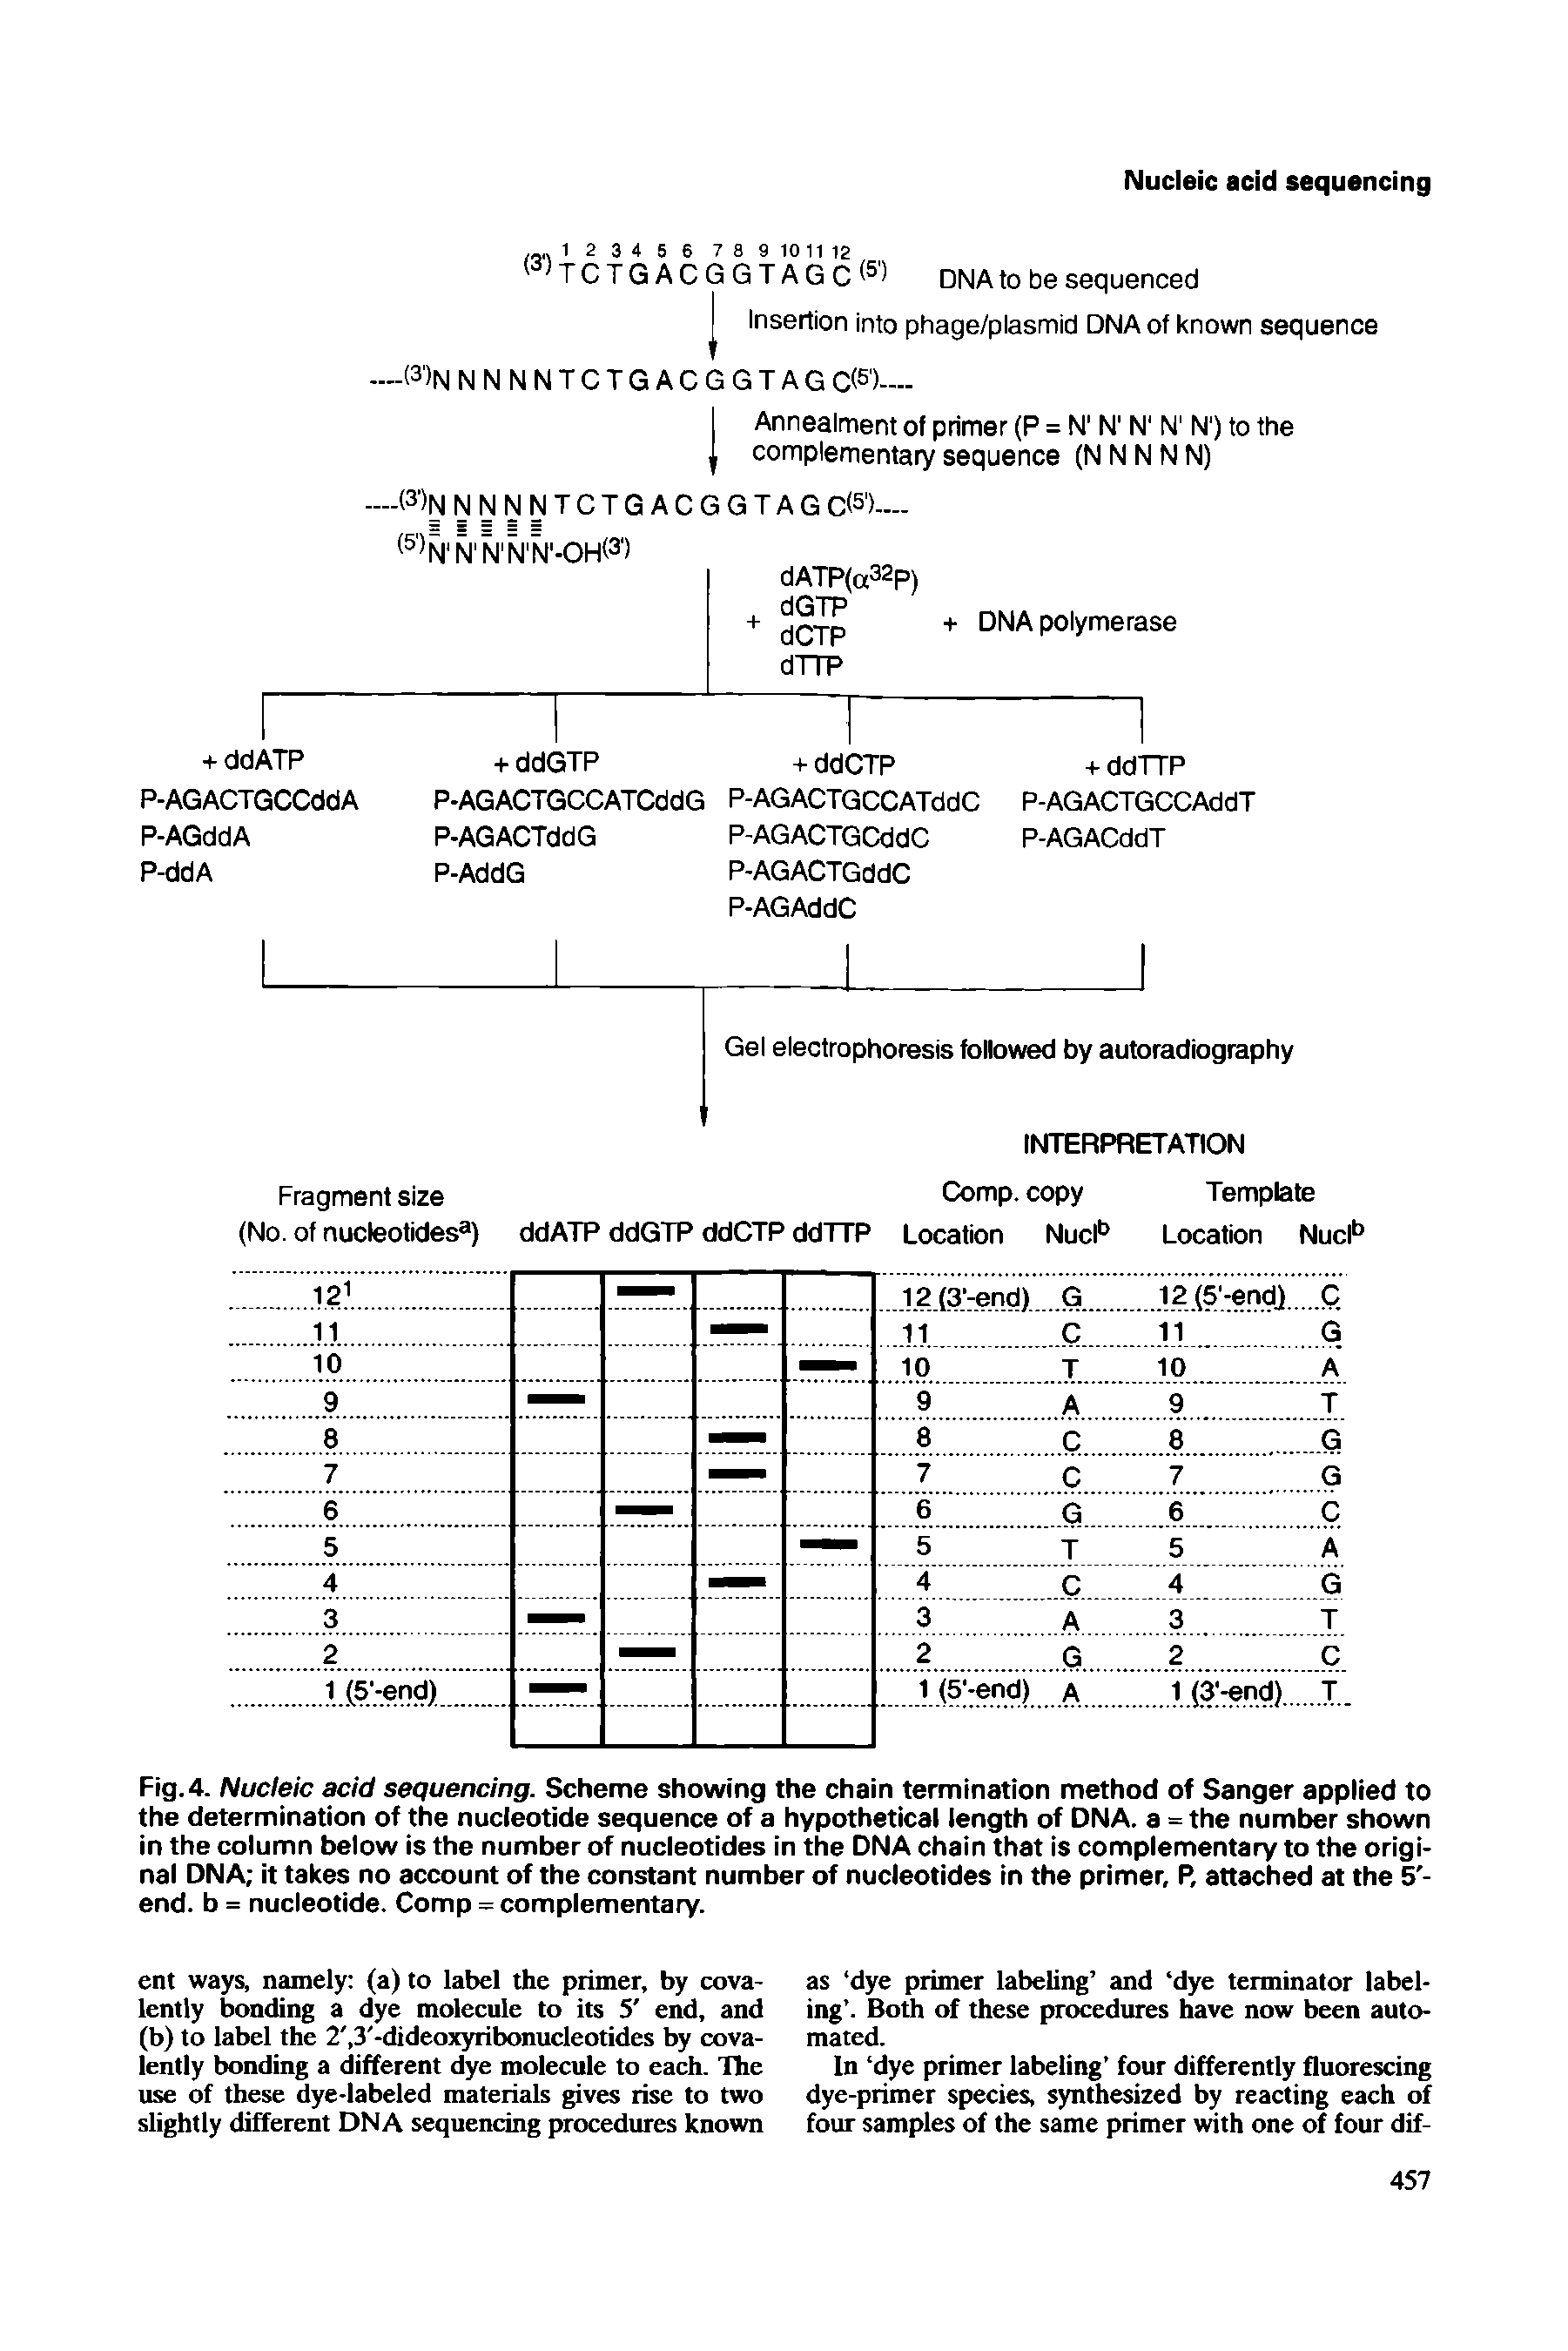 Fig. 4. Nucleic acid sequencing. Scheme showing the chain termination method of Sanger applied to the determination of the nucleotide sequence of a hypothetical length of DNA. a = the number shown in the column below is the number of nucleotides in the DNA chain that is complementary to the original DNA it takes no account of the constant number of nucleotides in the primer, P, attached at the 5 -end. b = nucleotide. Comp = complementary.